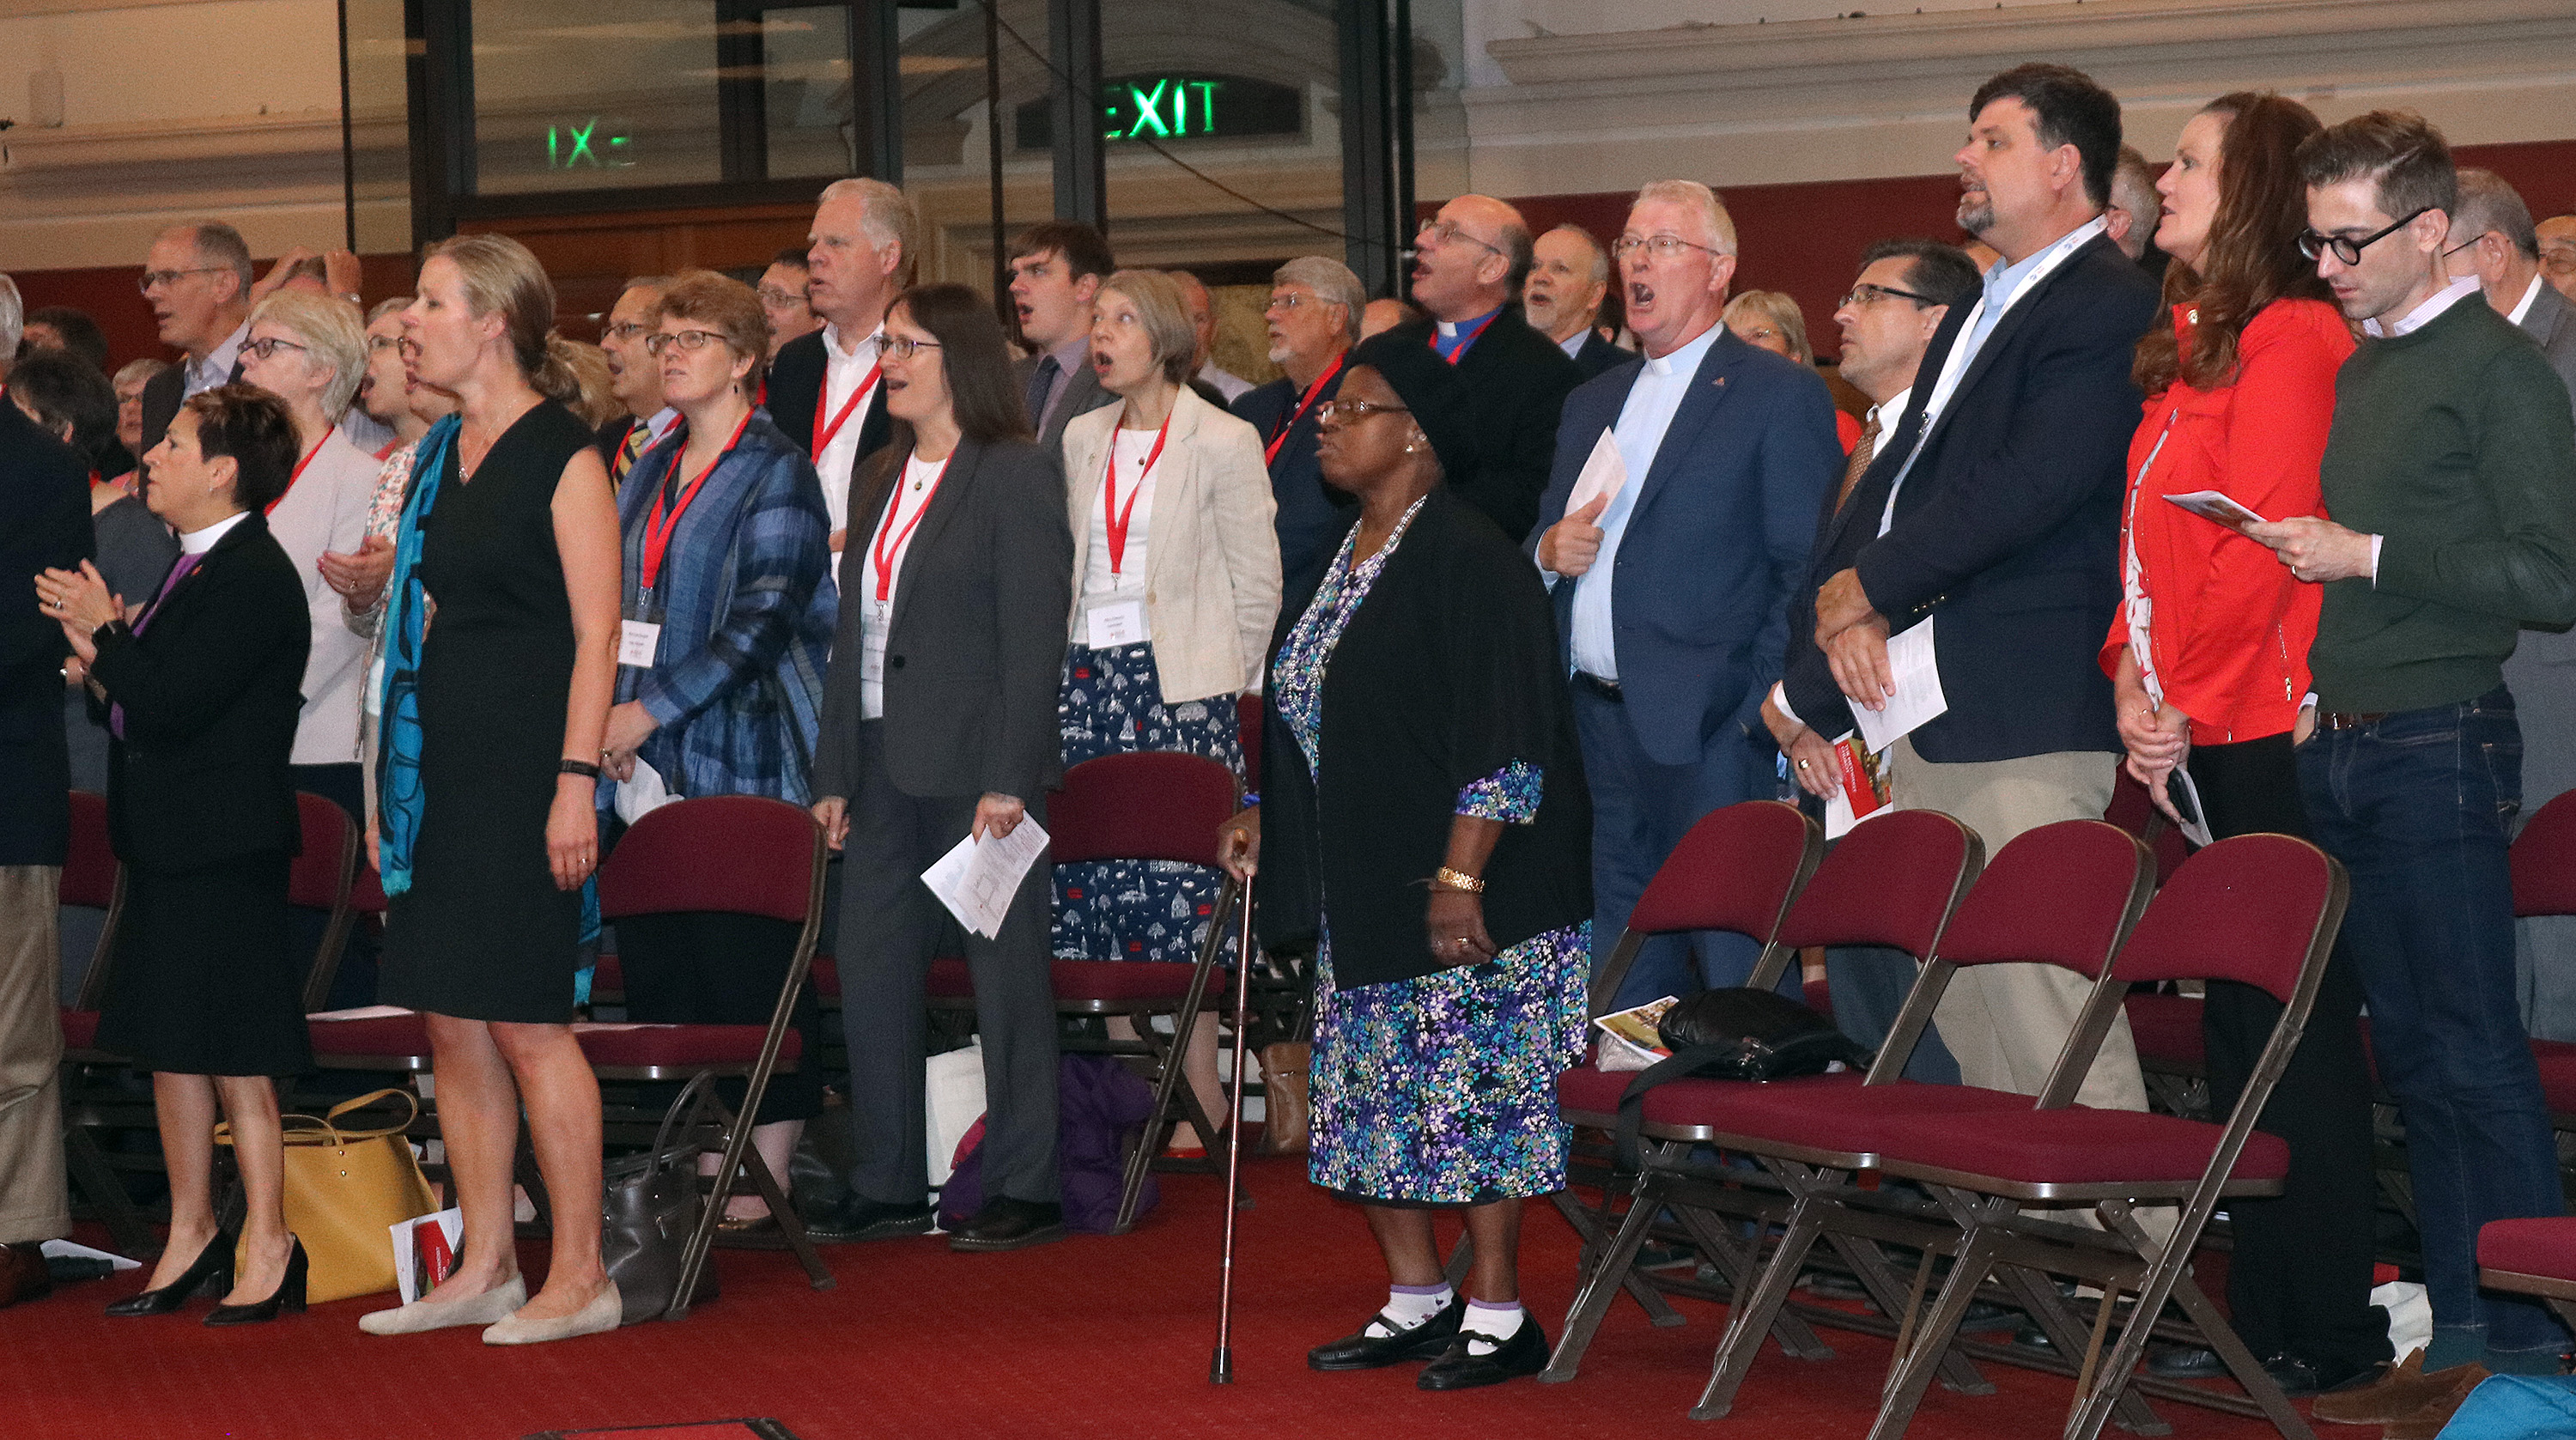 United Methodists and British Methodists sing at Methodist Central Hall, Westminster, during the 50th anniversary celebration of the partnership between the two churches. Photo by Priscilla Muzerengwa.